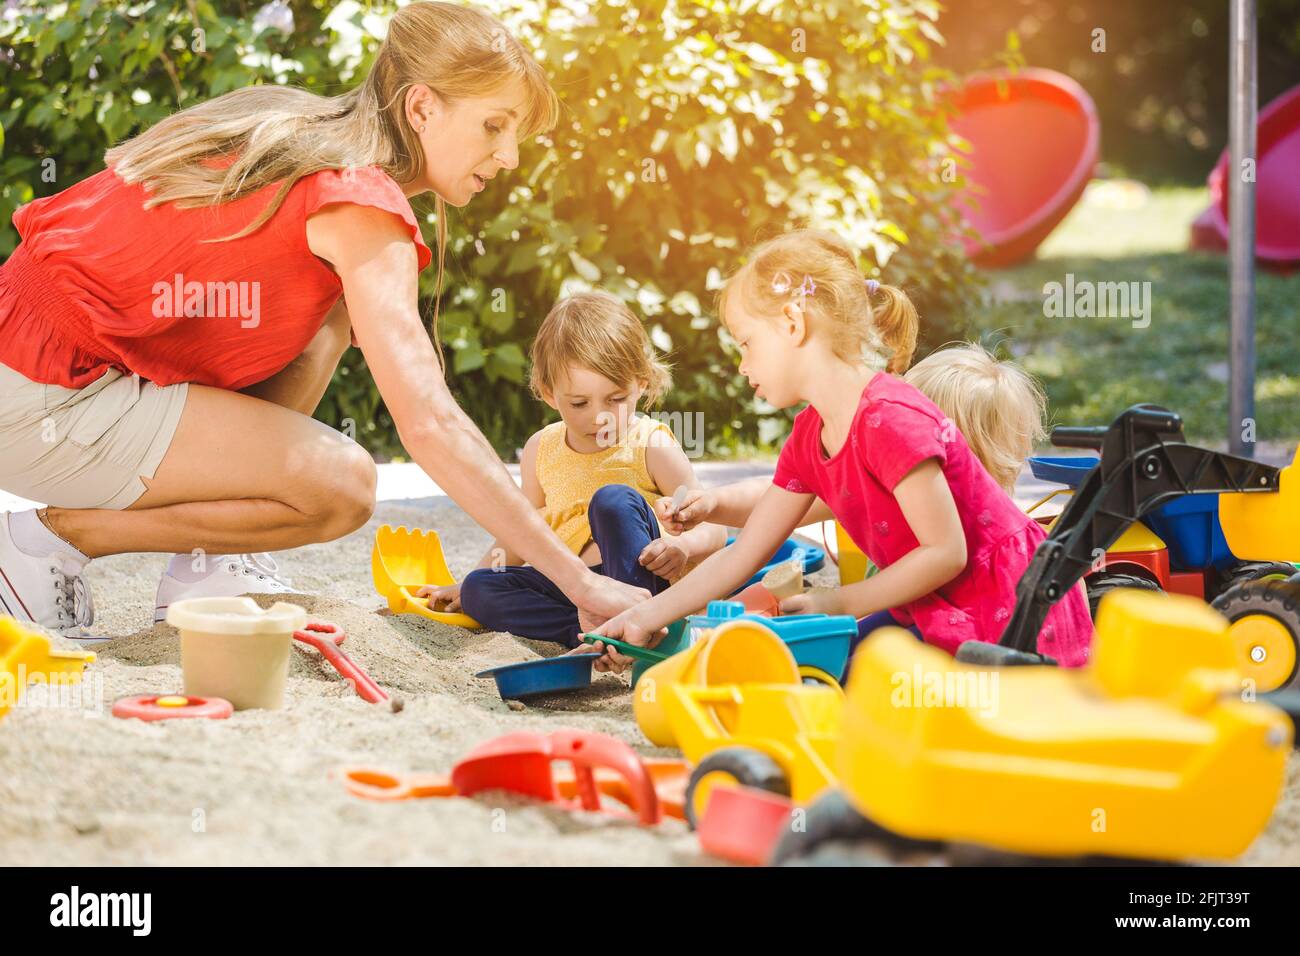 Children and play school teacher enjoying some time in sand box Stock Photo